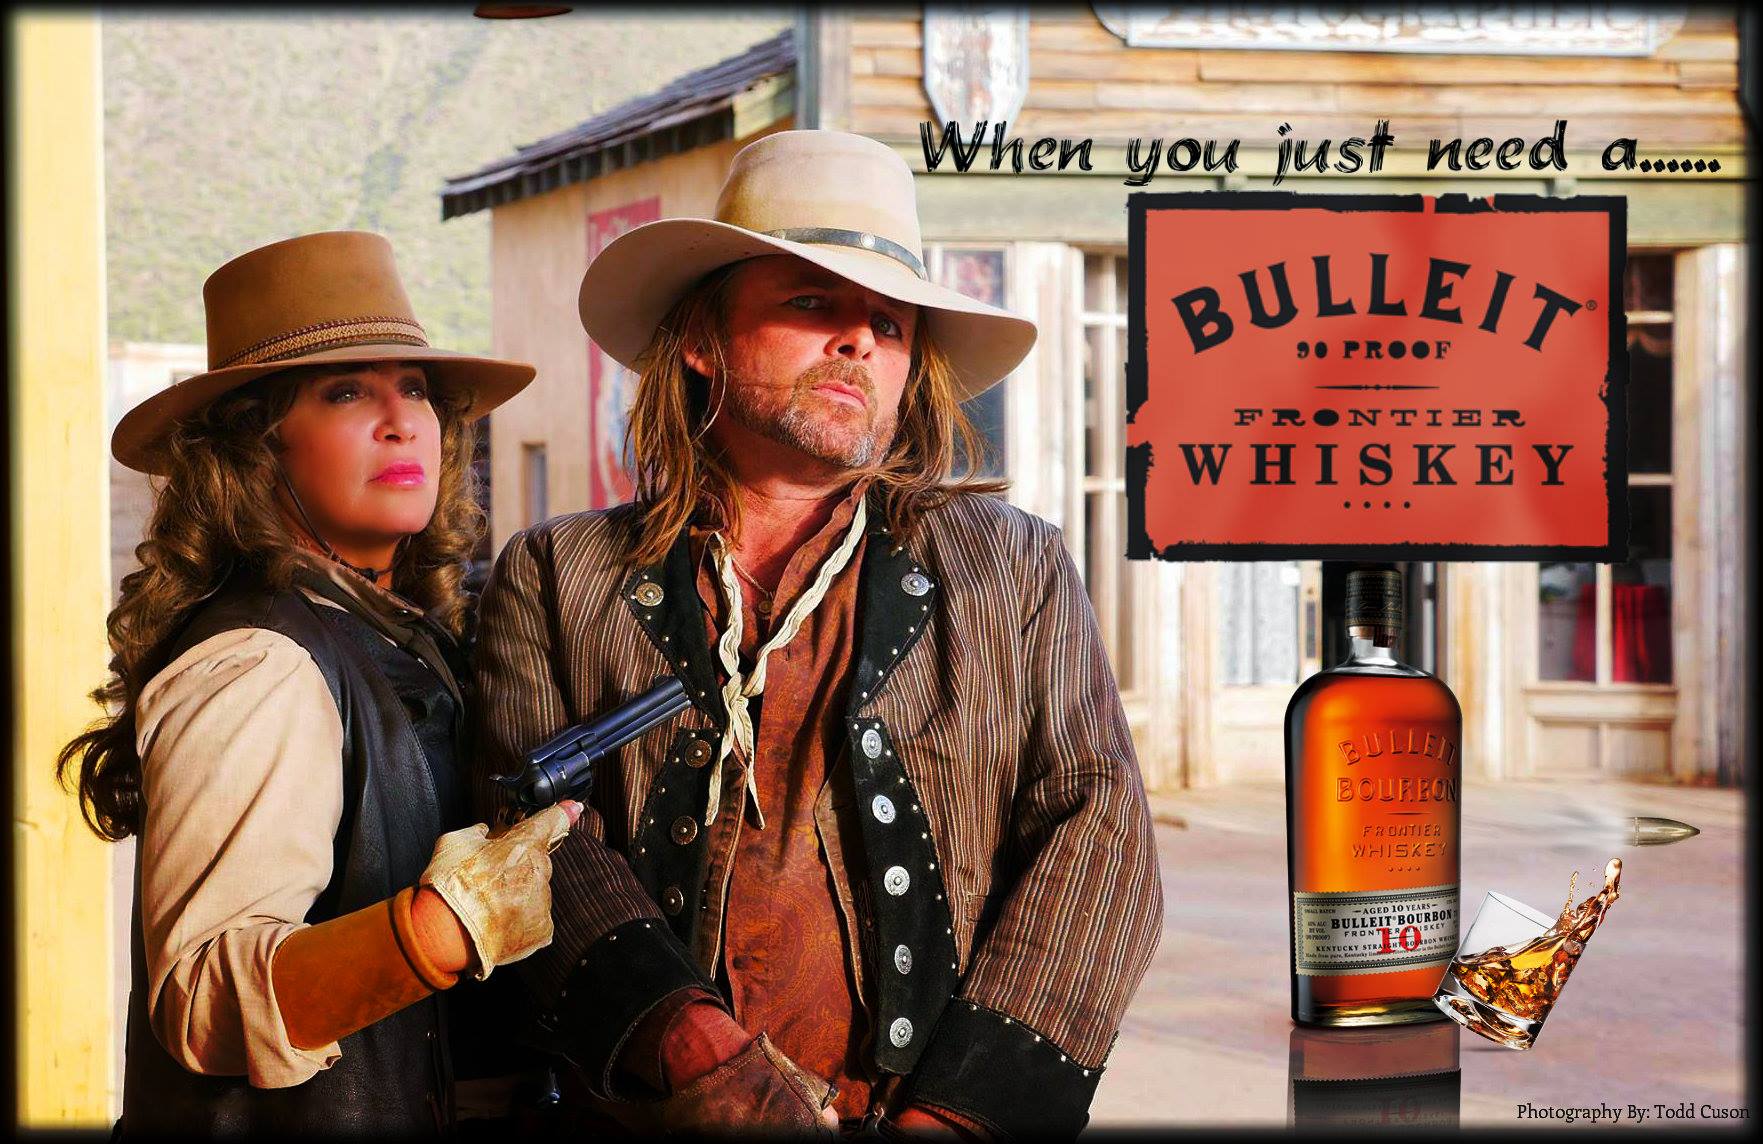 When you just need a Bulleit.